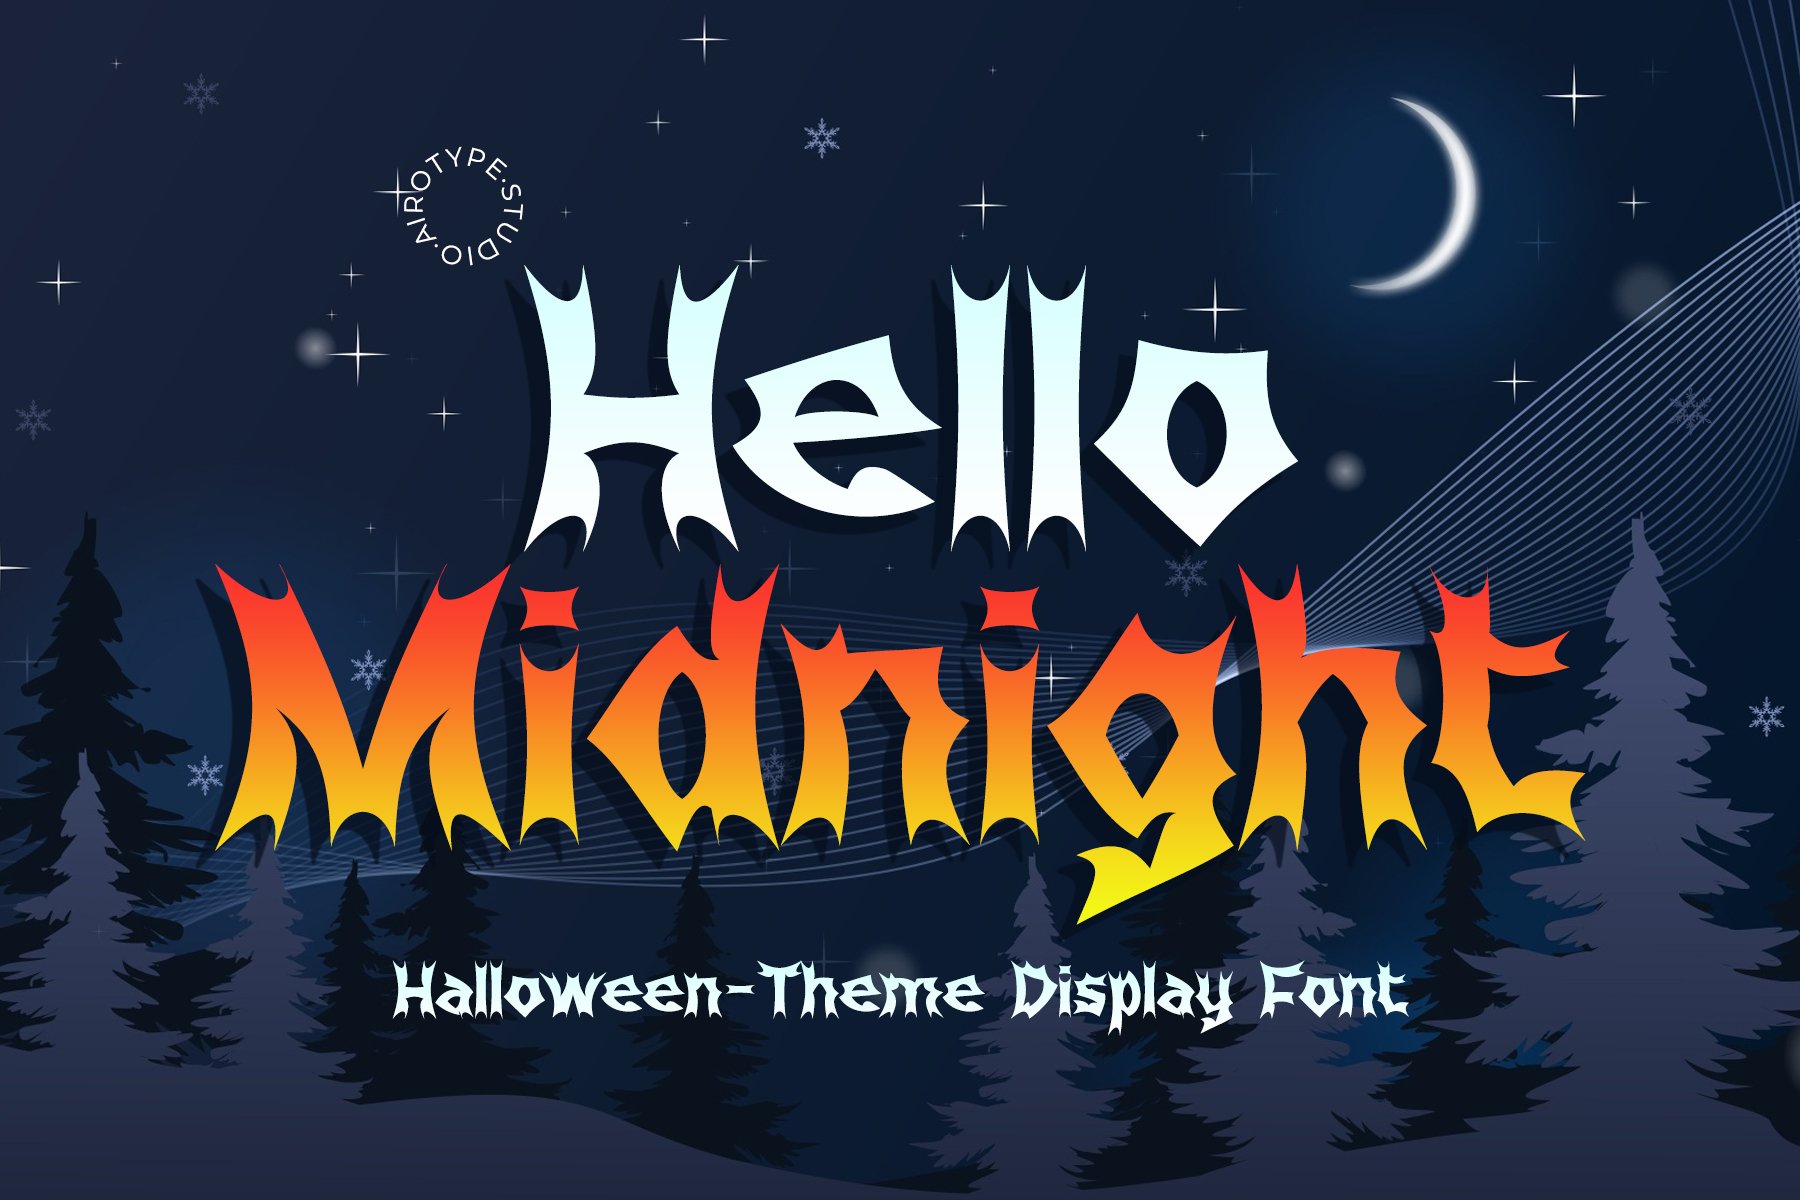 Hello Midnight - Halloween Font cover image.